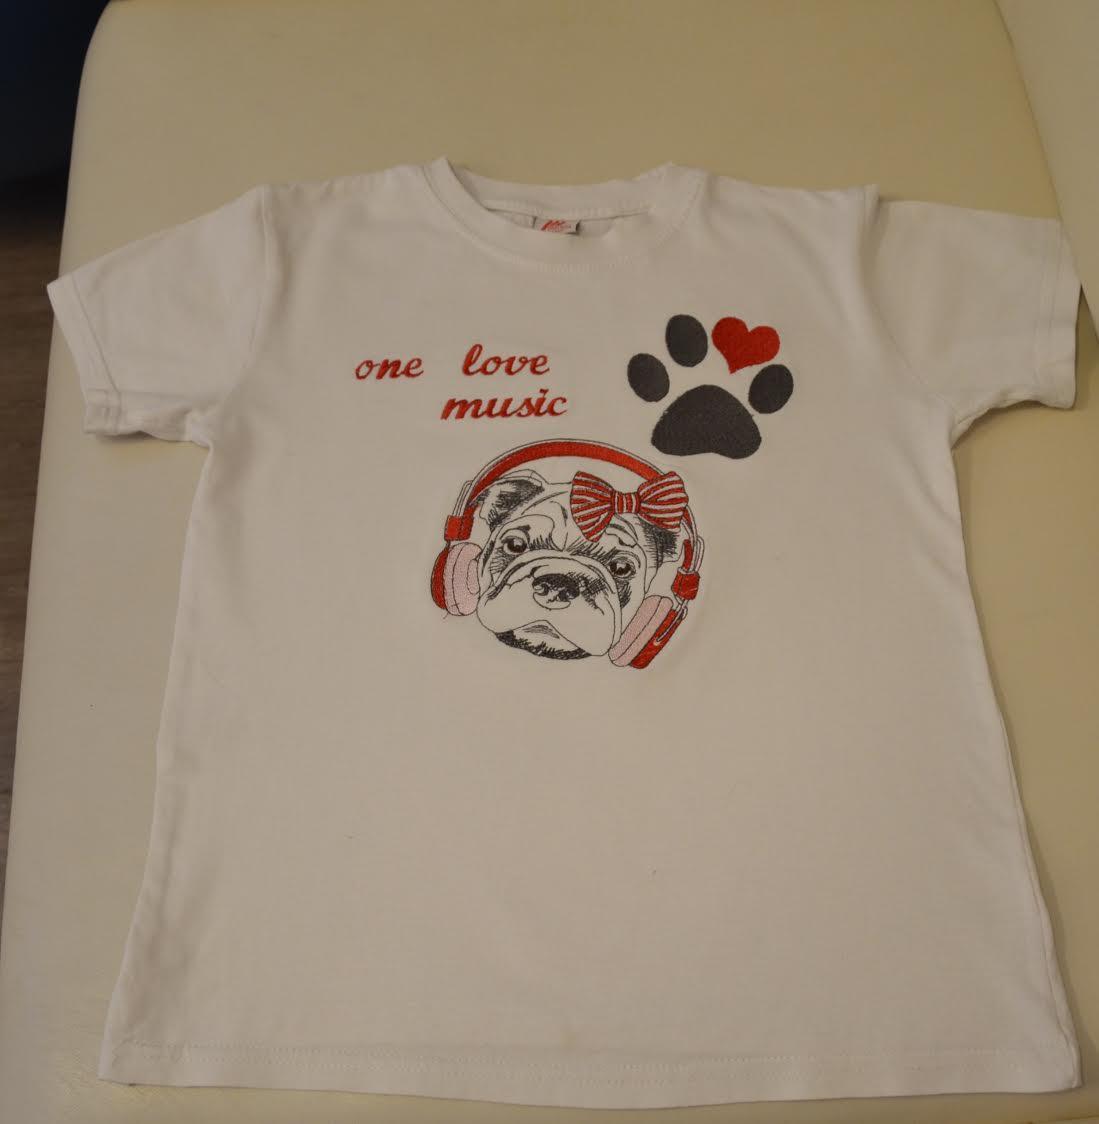 T-shirt with embroidered dog in headphones design